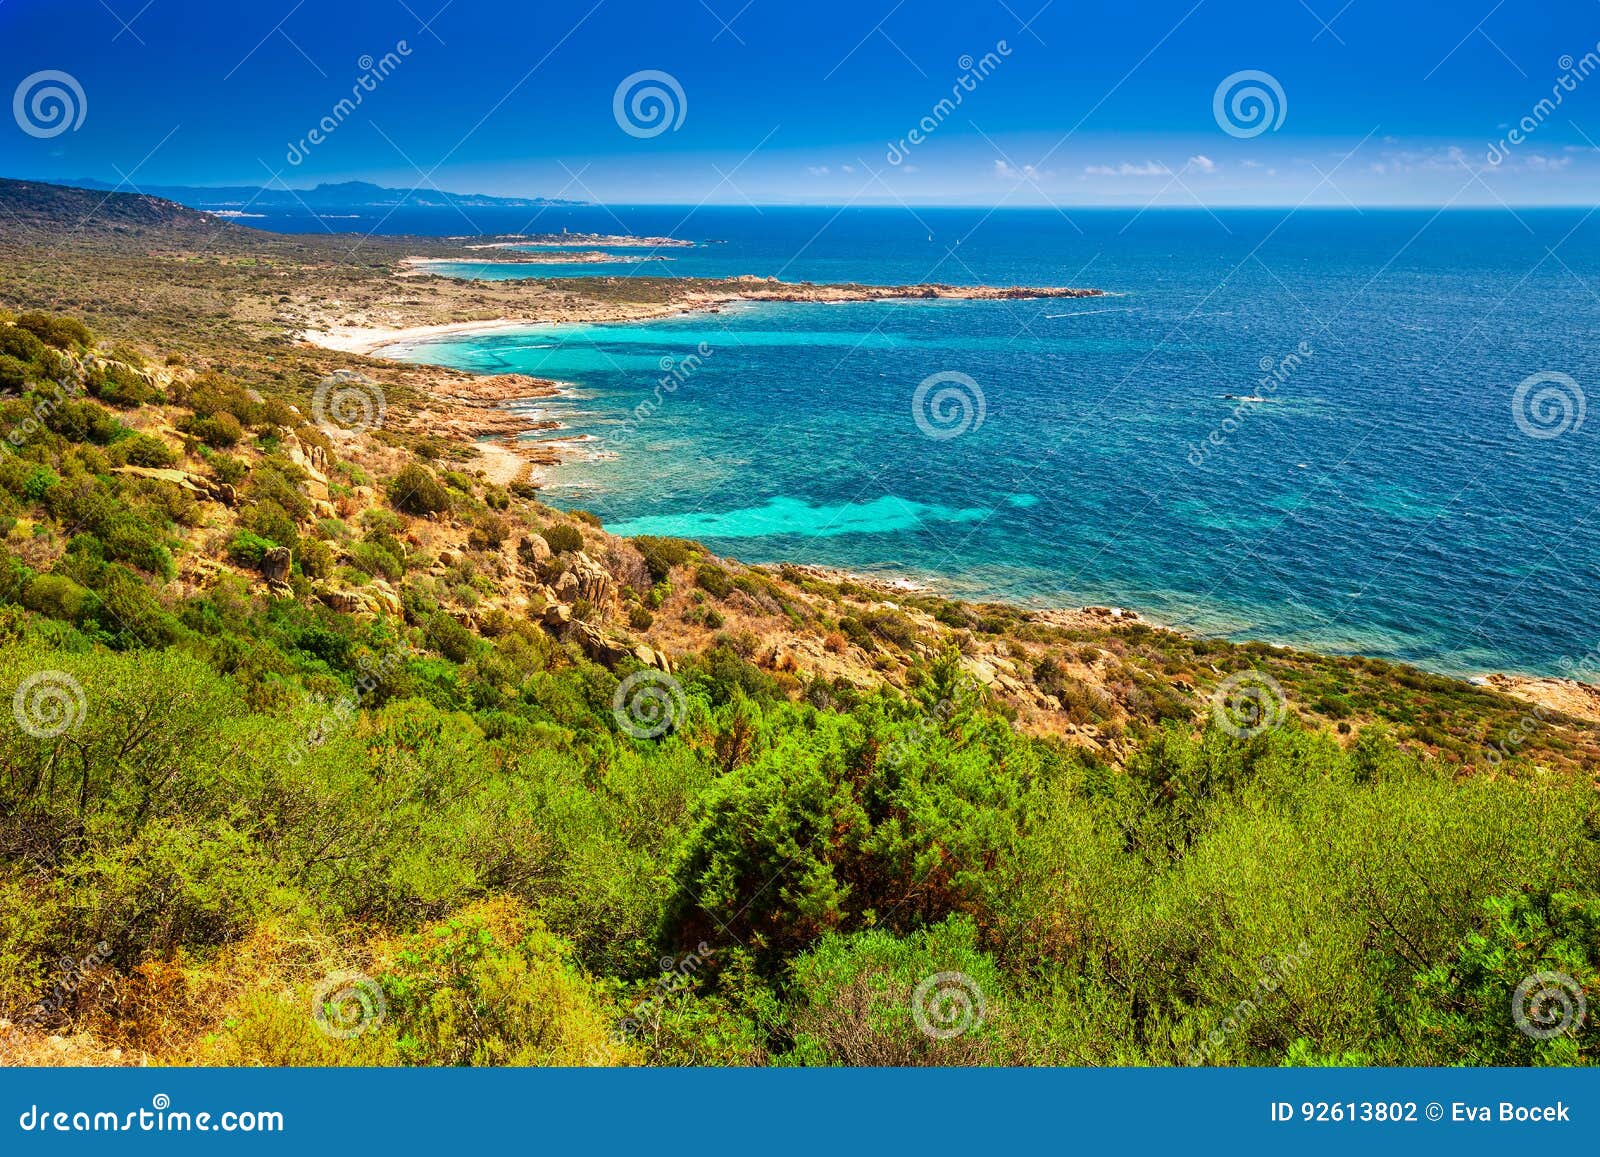 corsica coastline with rocky beach and tourquise clear water near ajaccio, corsica, france, europe.